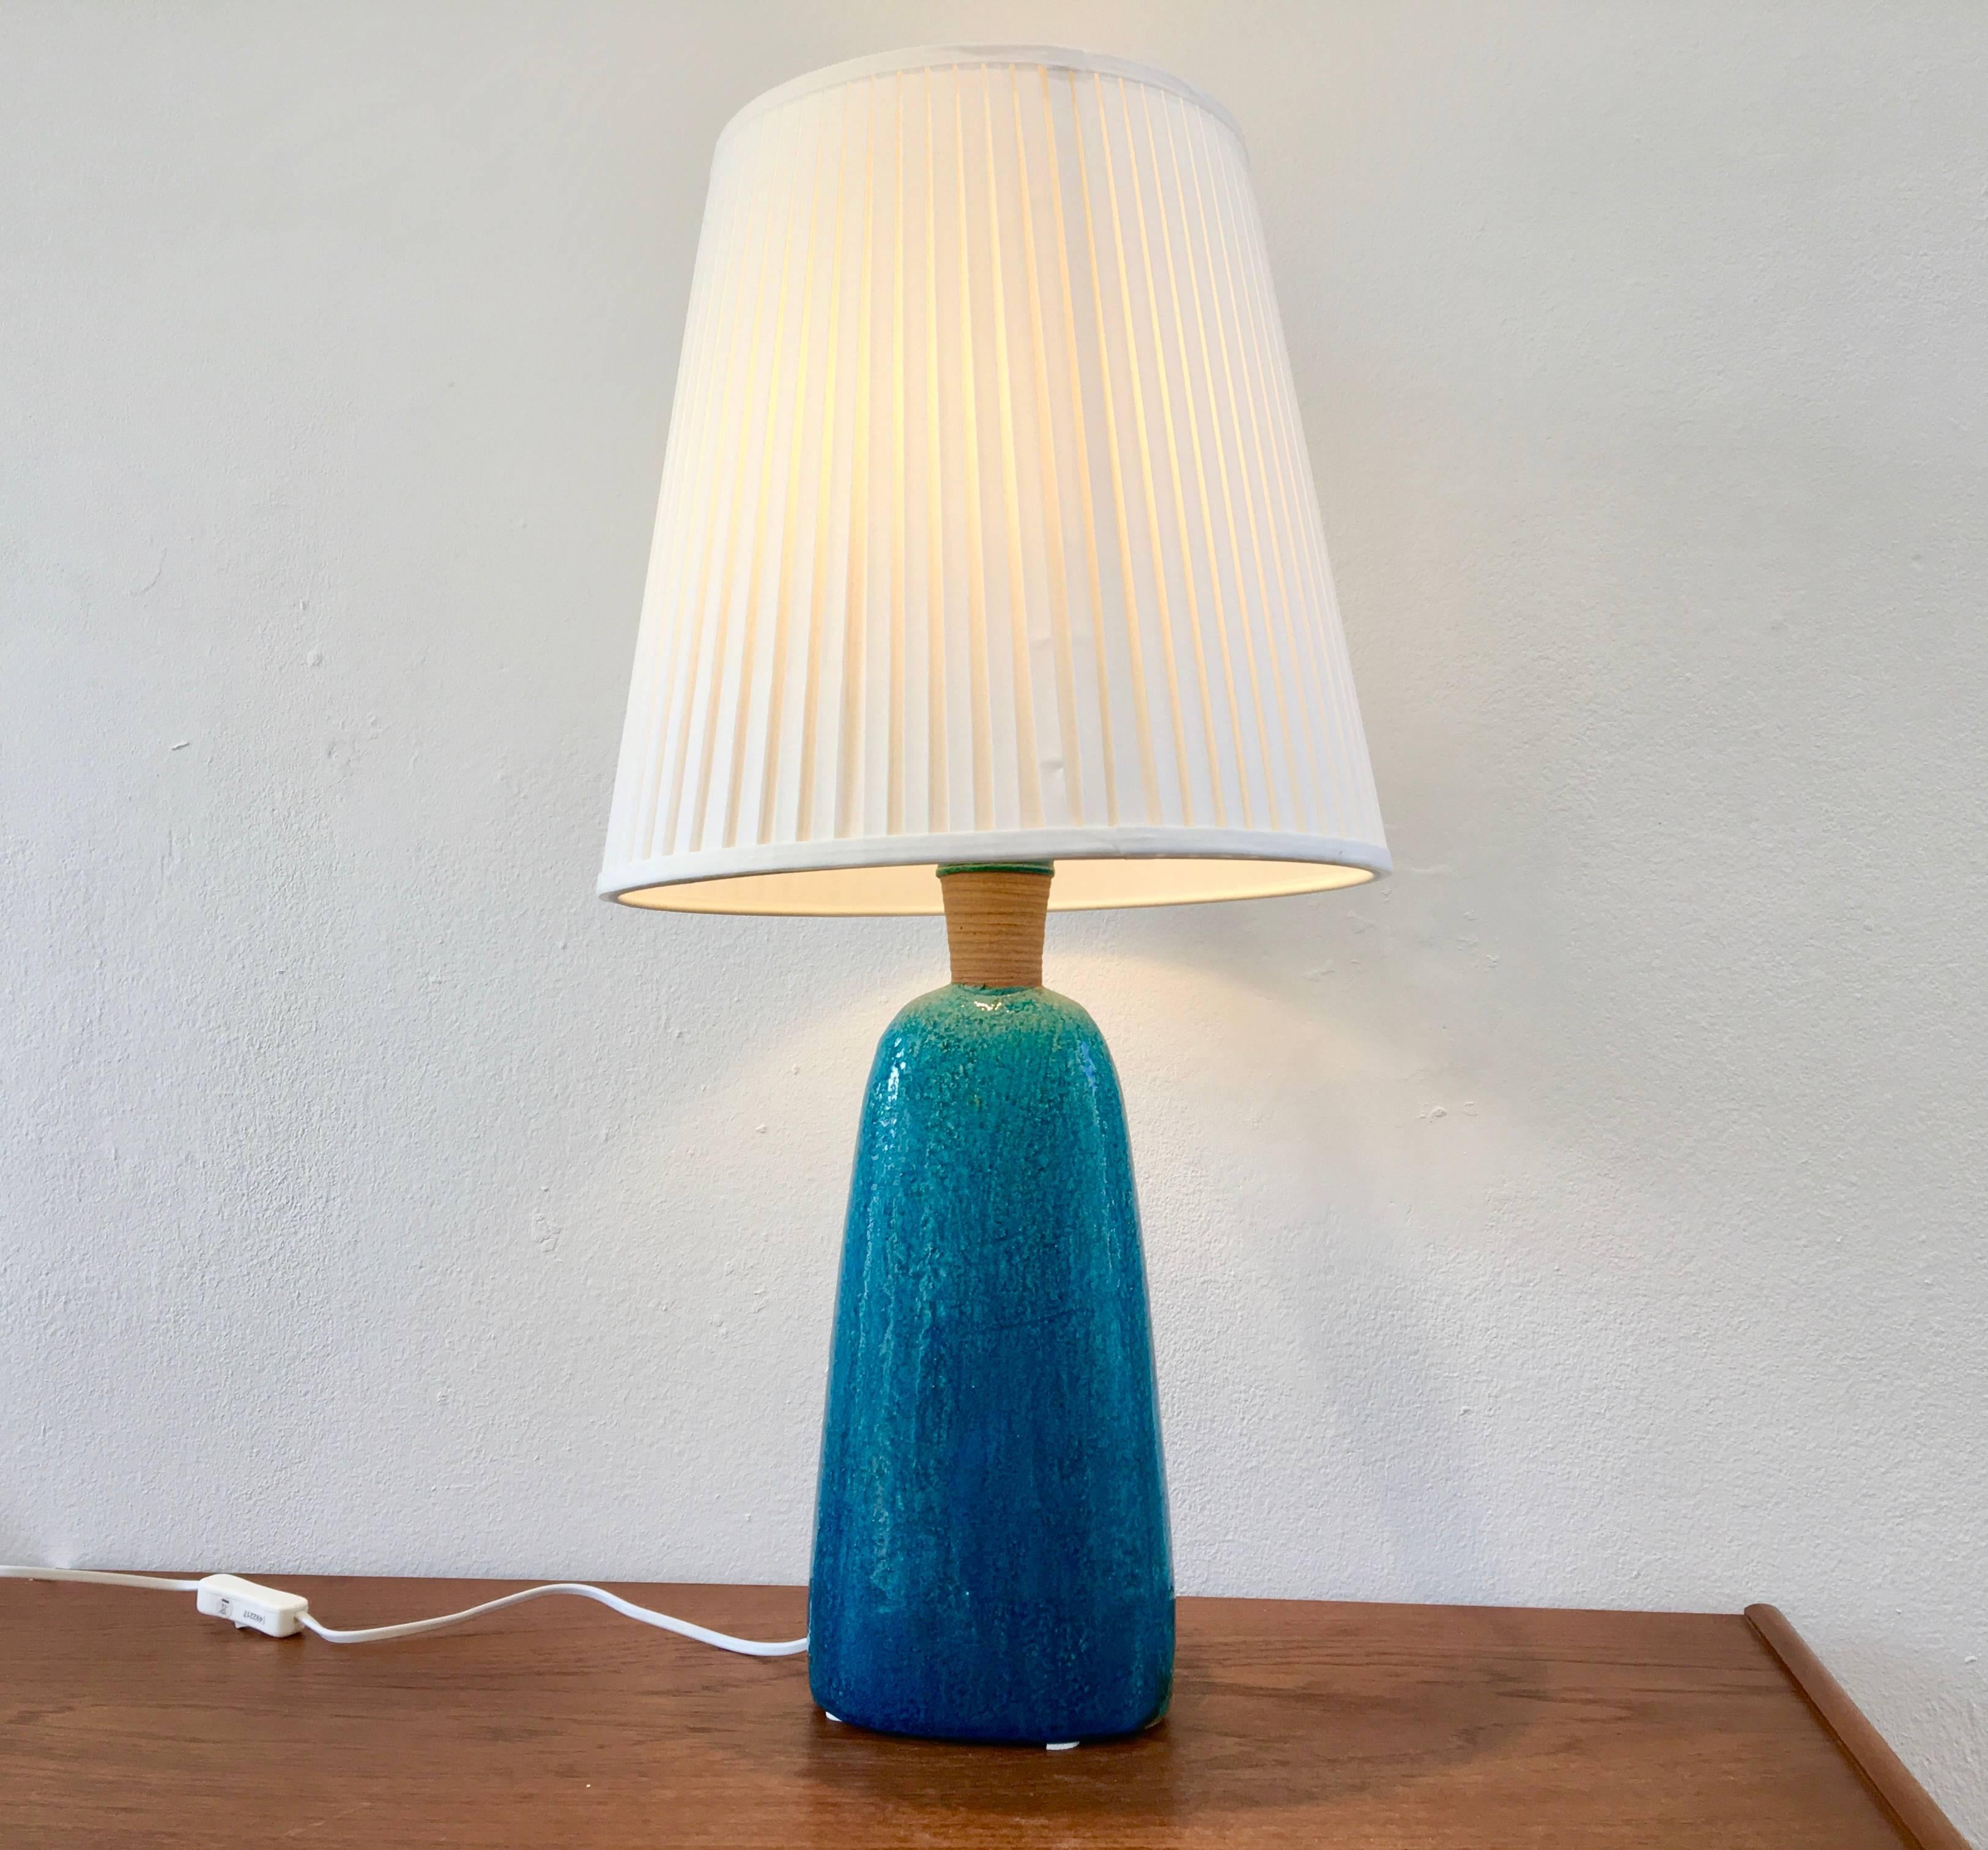 This large stoneware table lamp was designed by Nils Kähler and made in the 1950s by Herman A Kähler Ceramic (HAK) in Denmark. It has a turquoise colored glaze. The lamp has been rewired with a switch, new socket and a new shade. The lamp is signed